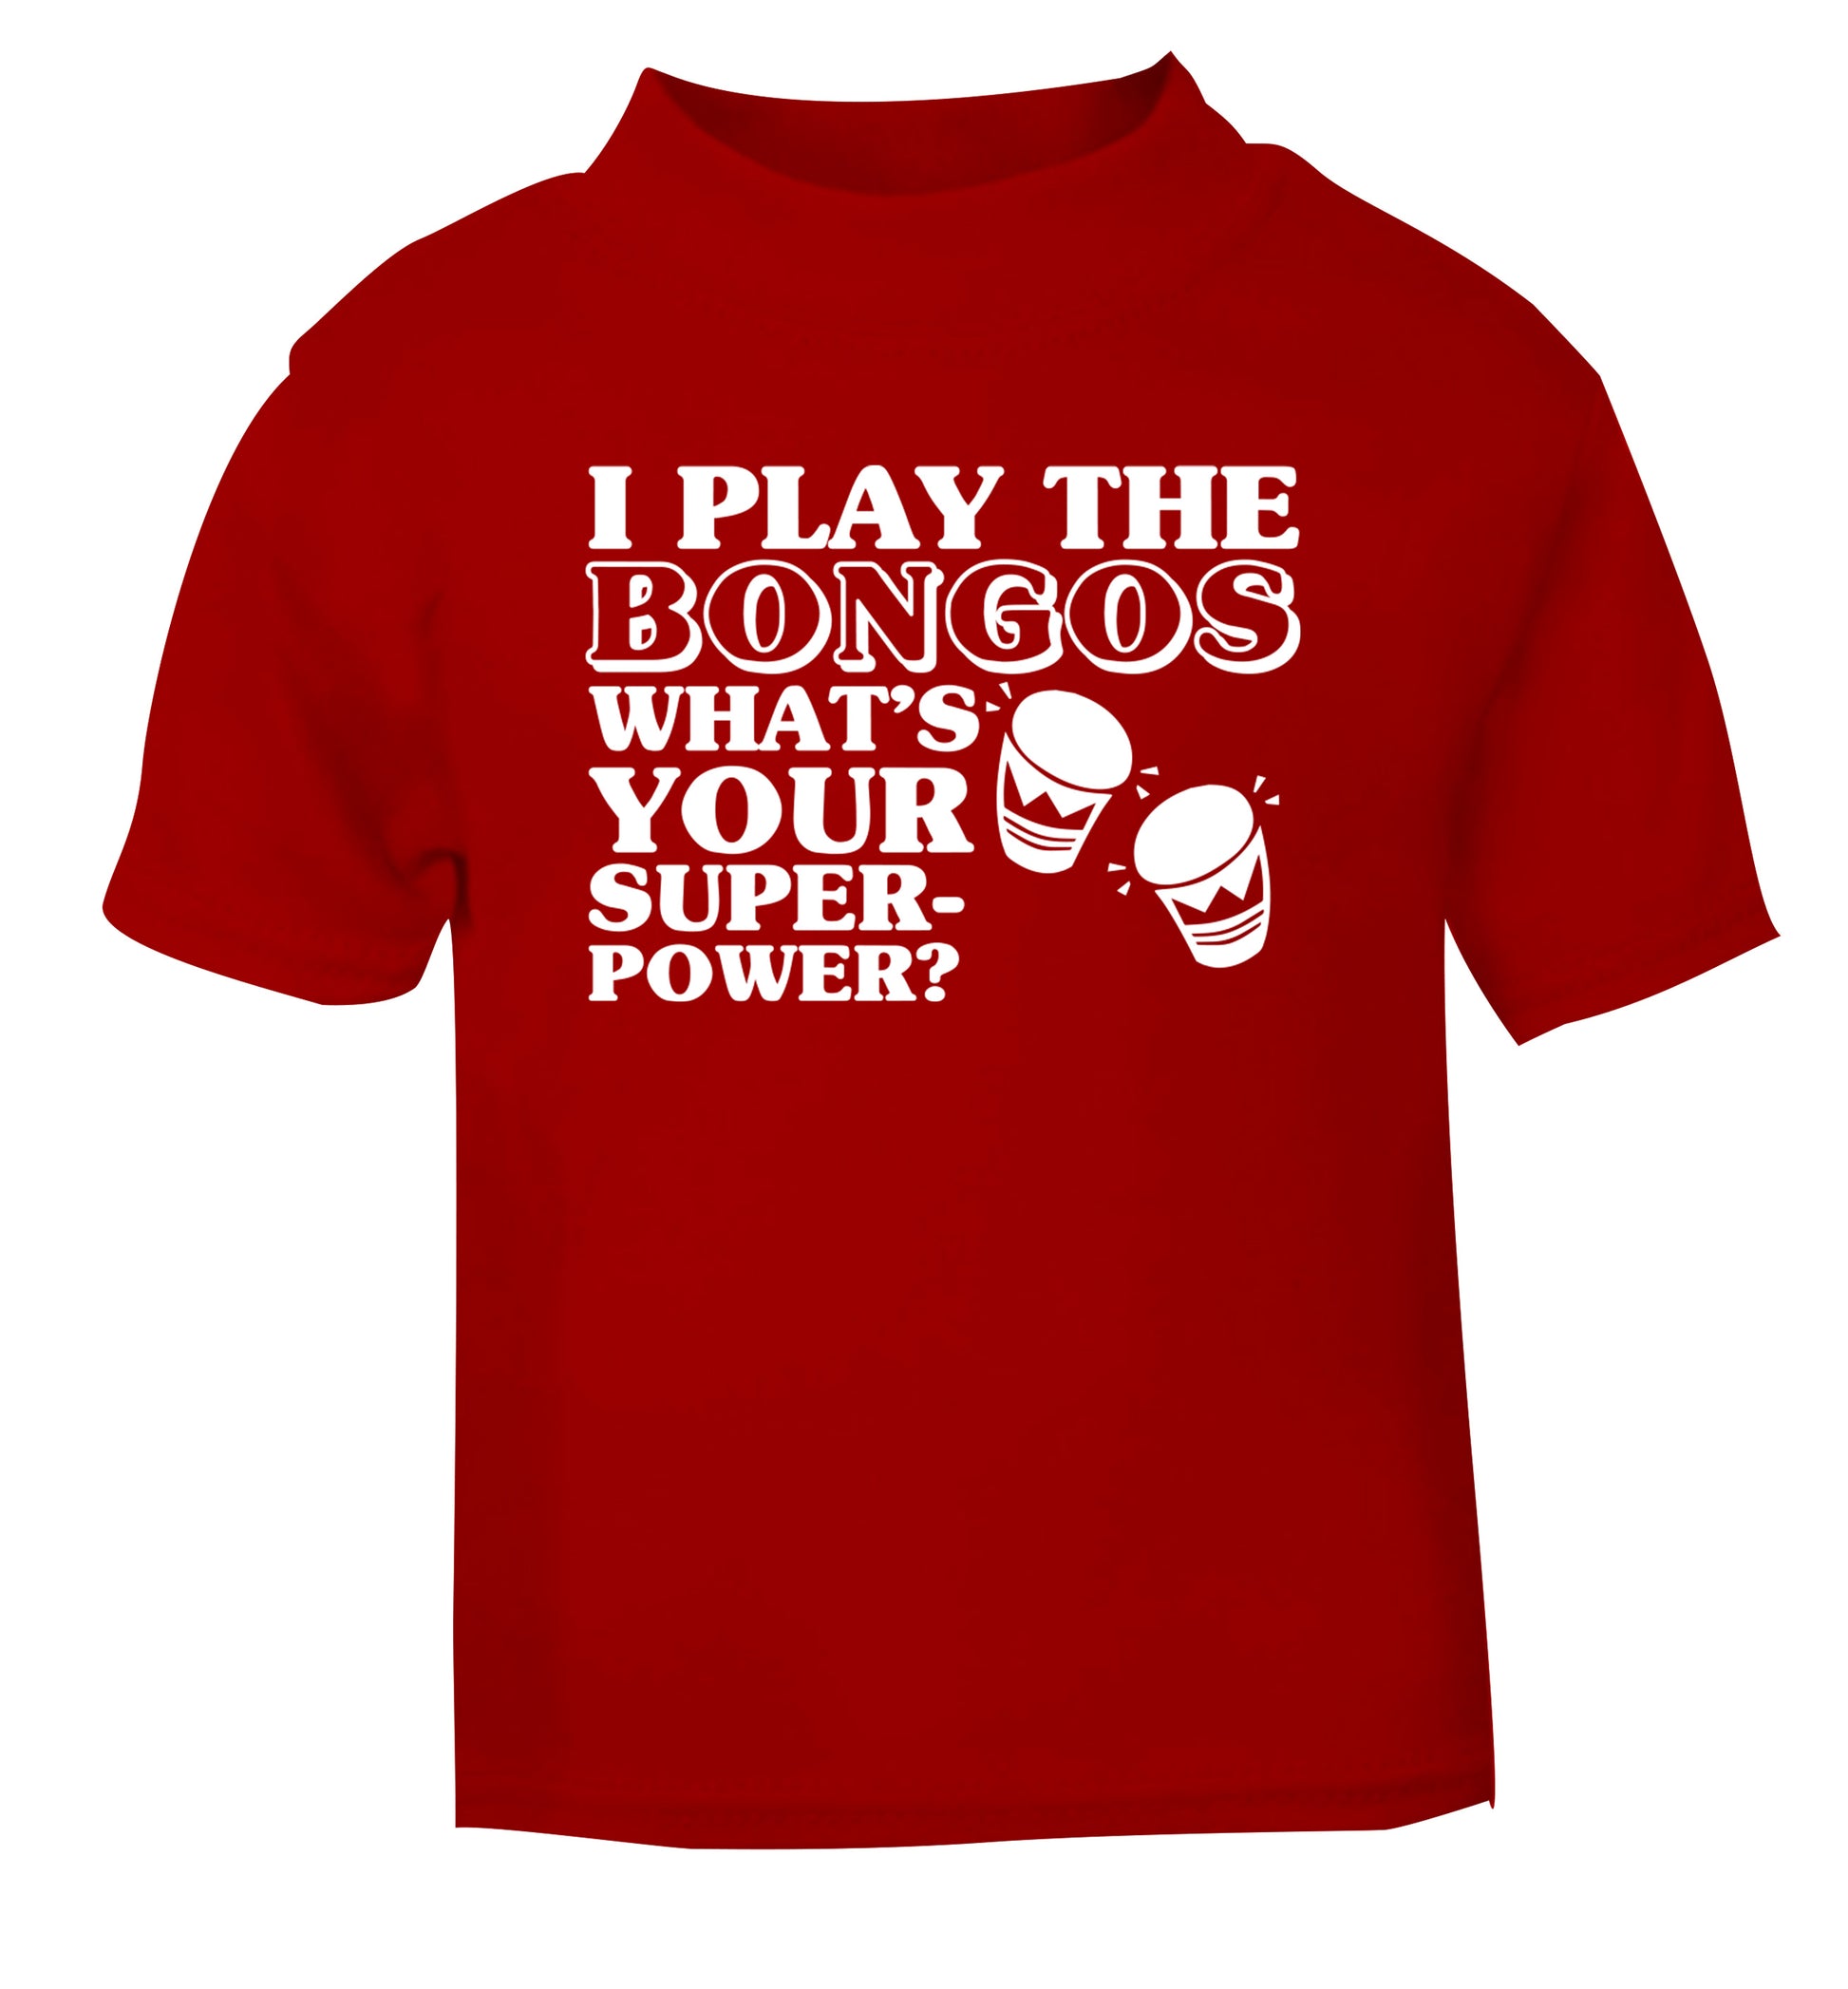 I play the bongos what's your superpower? red Baby Toddler Tshirt 2 Years